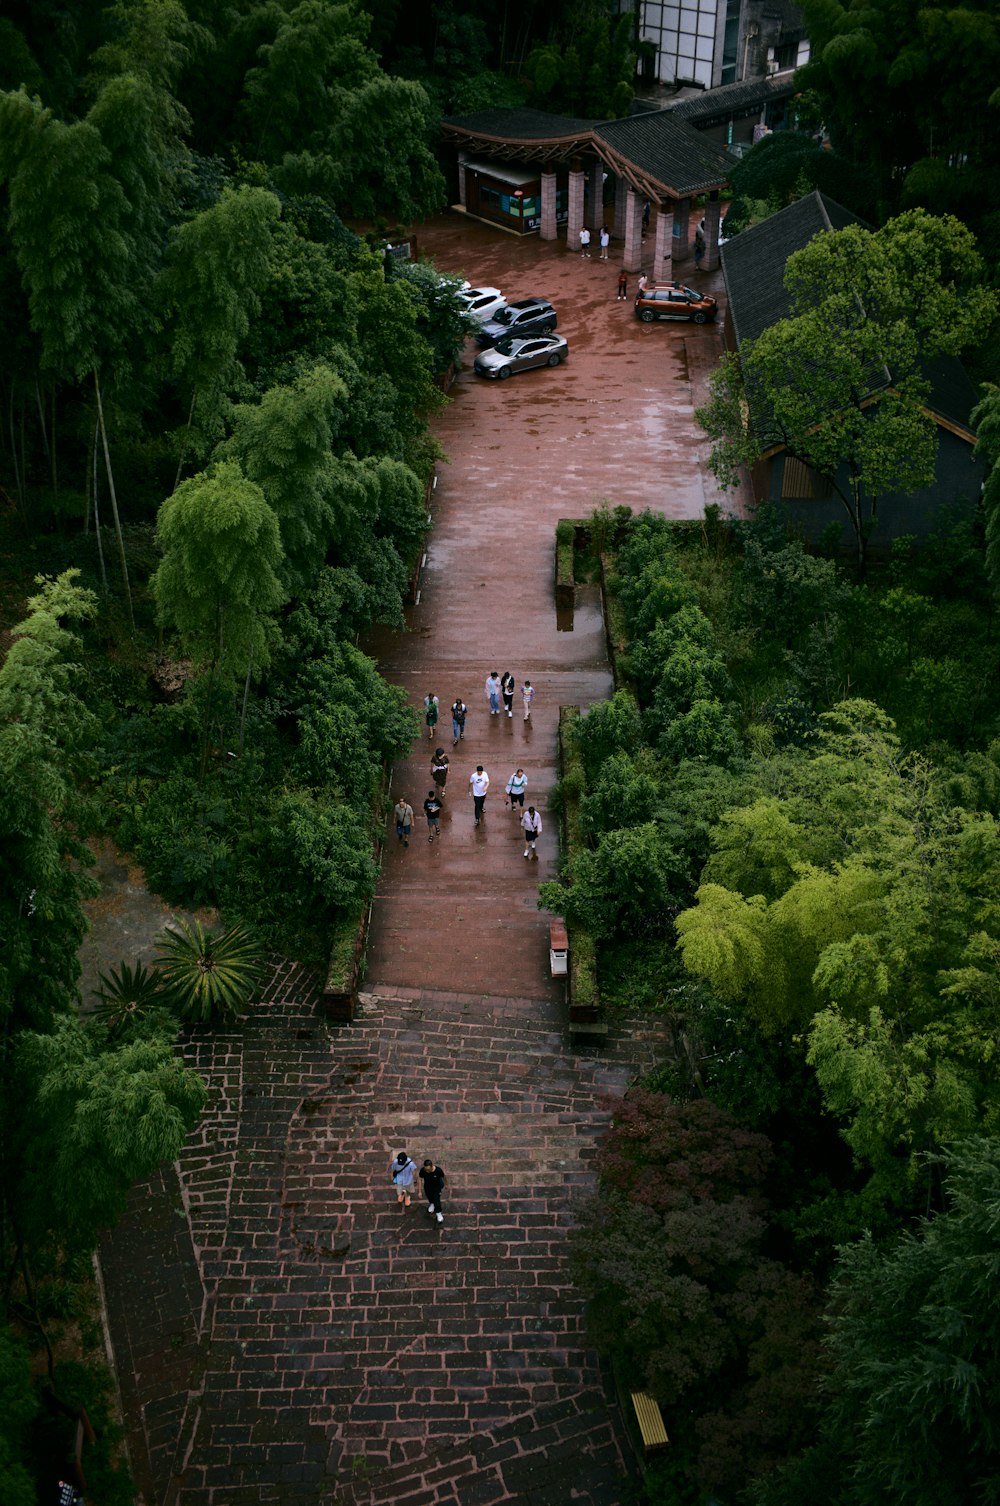 a group of people walking down a brick pathway